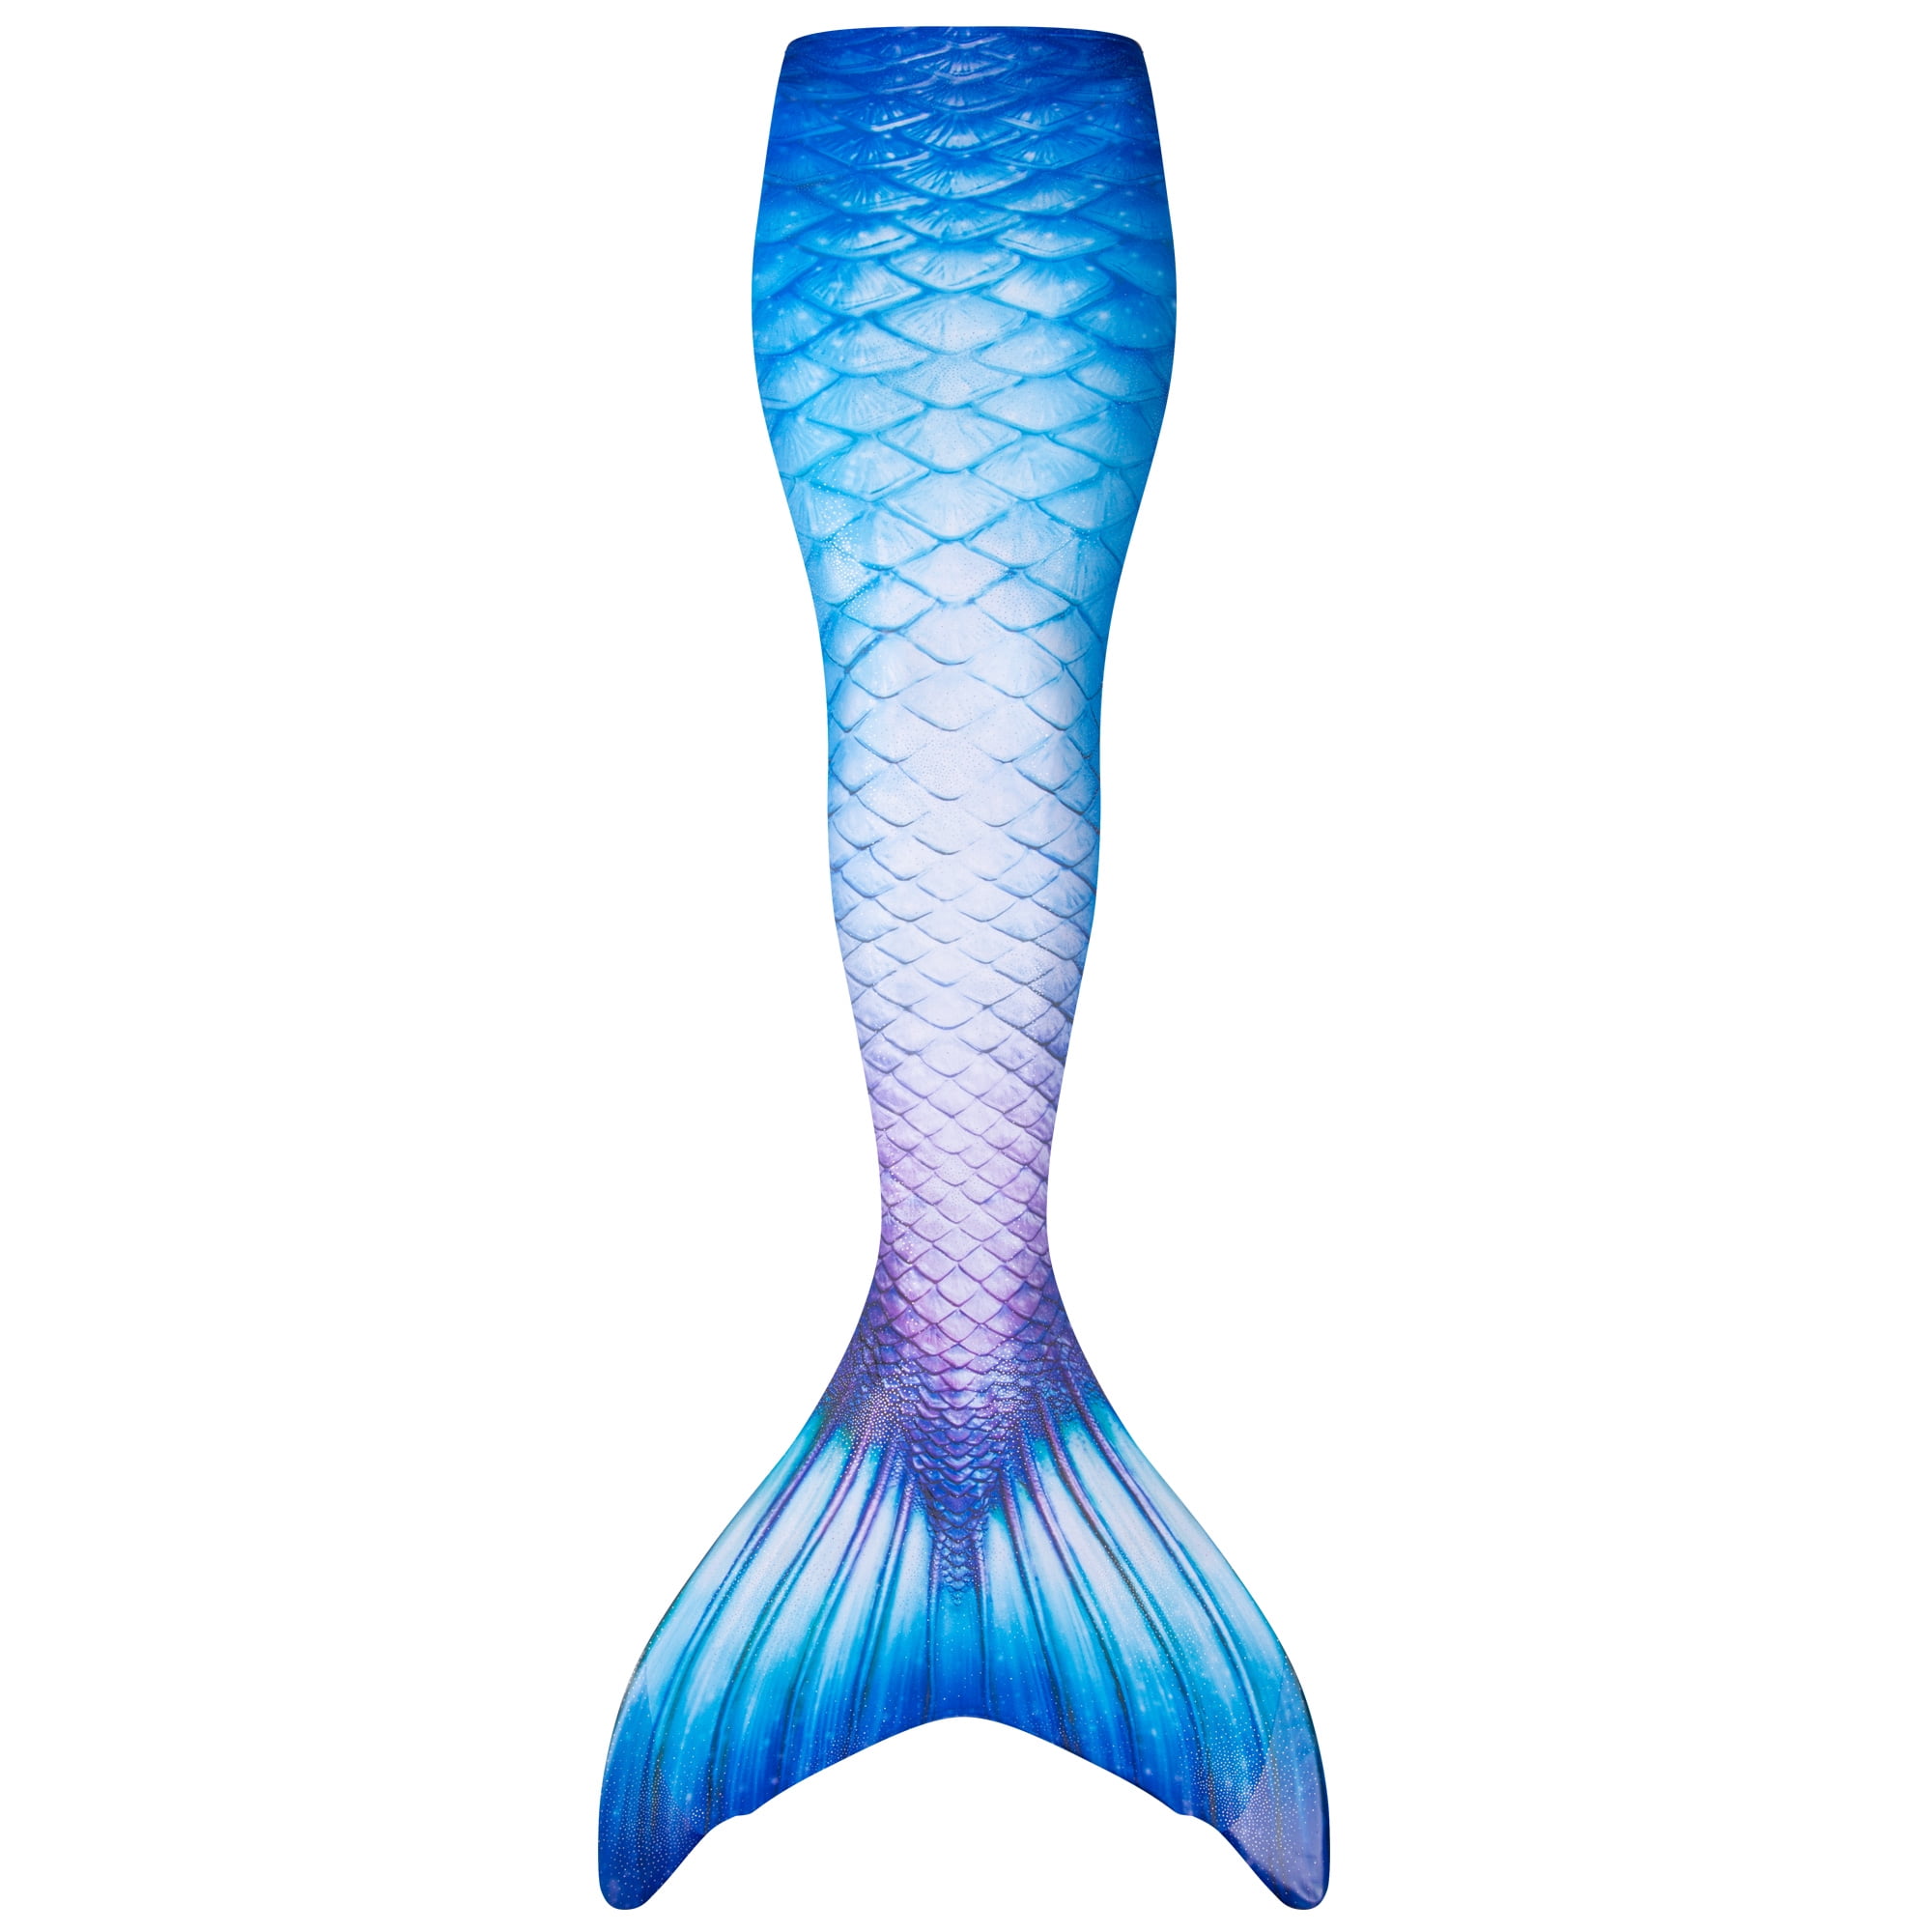 Fin Fun Mermaid Tails Swimming Monofin Kid Adult Sizes Limited